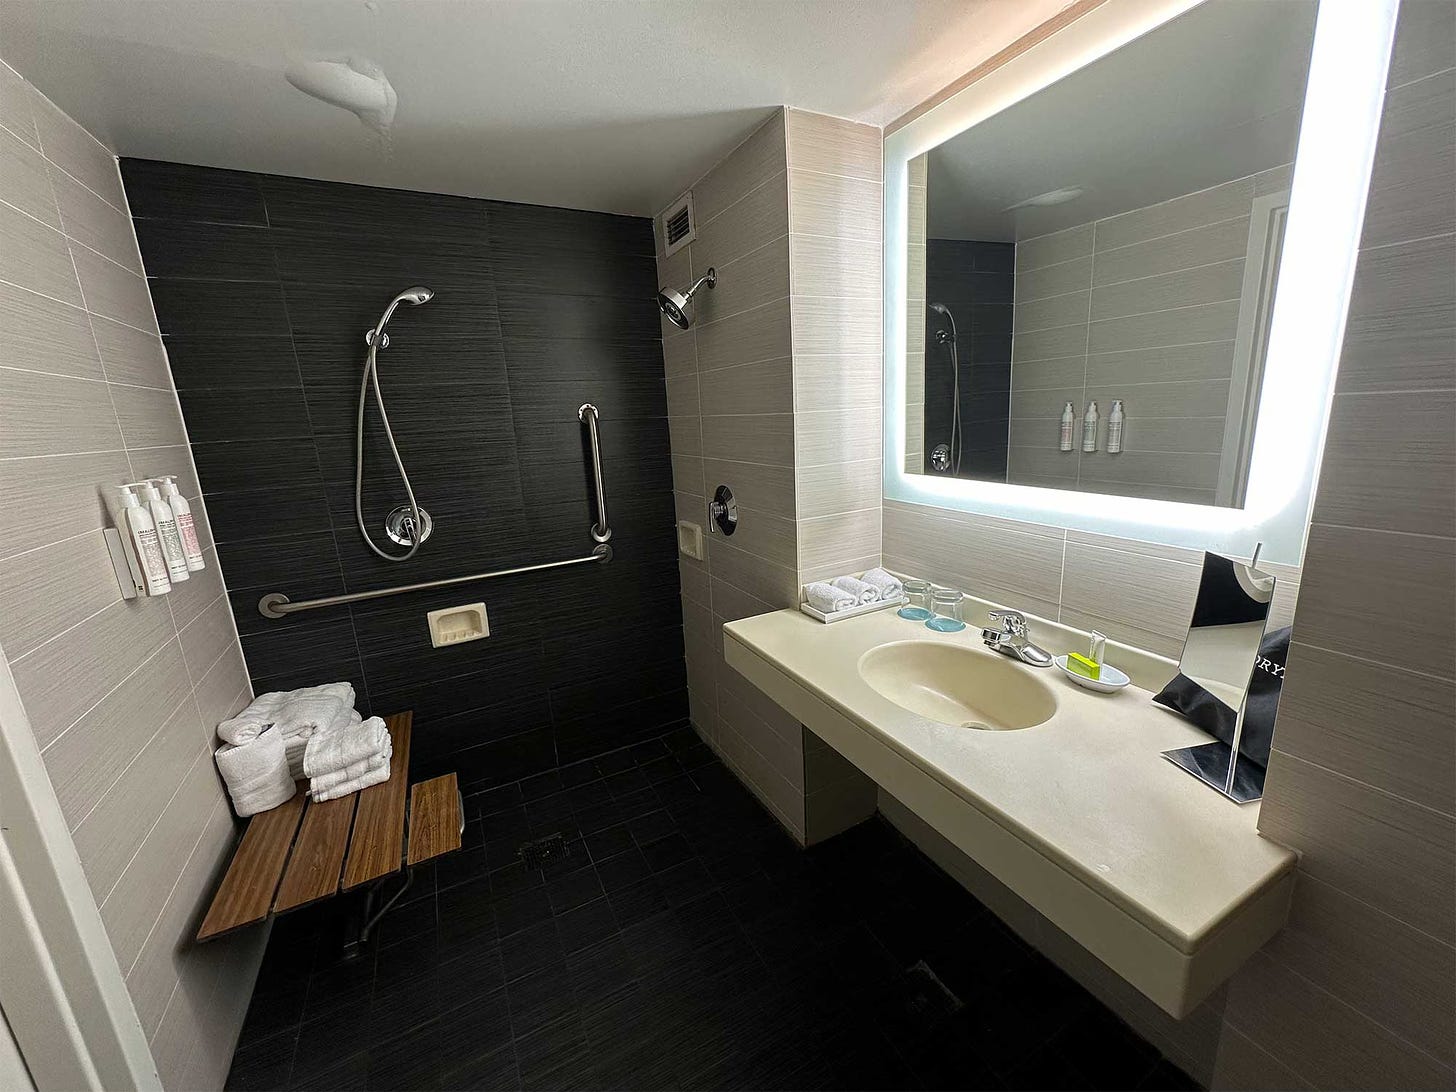 Adapted bathroom with roll-under sink and roll-in shower.